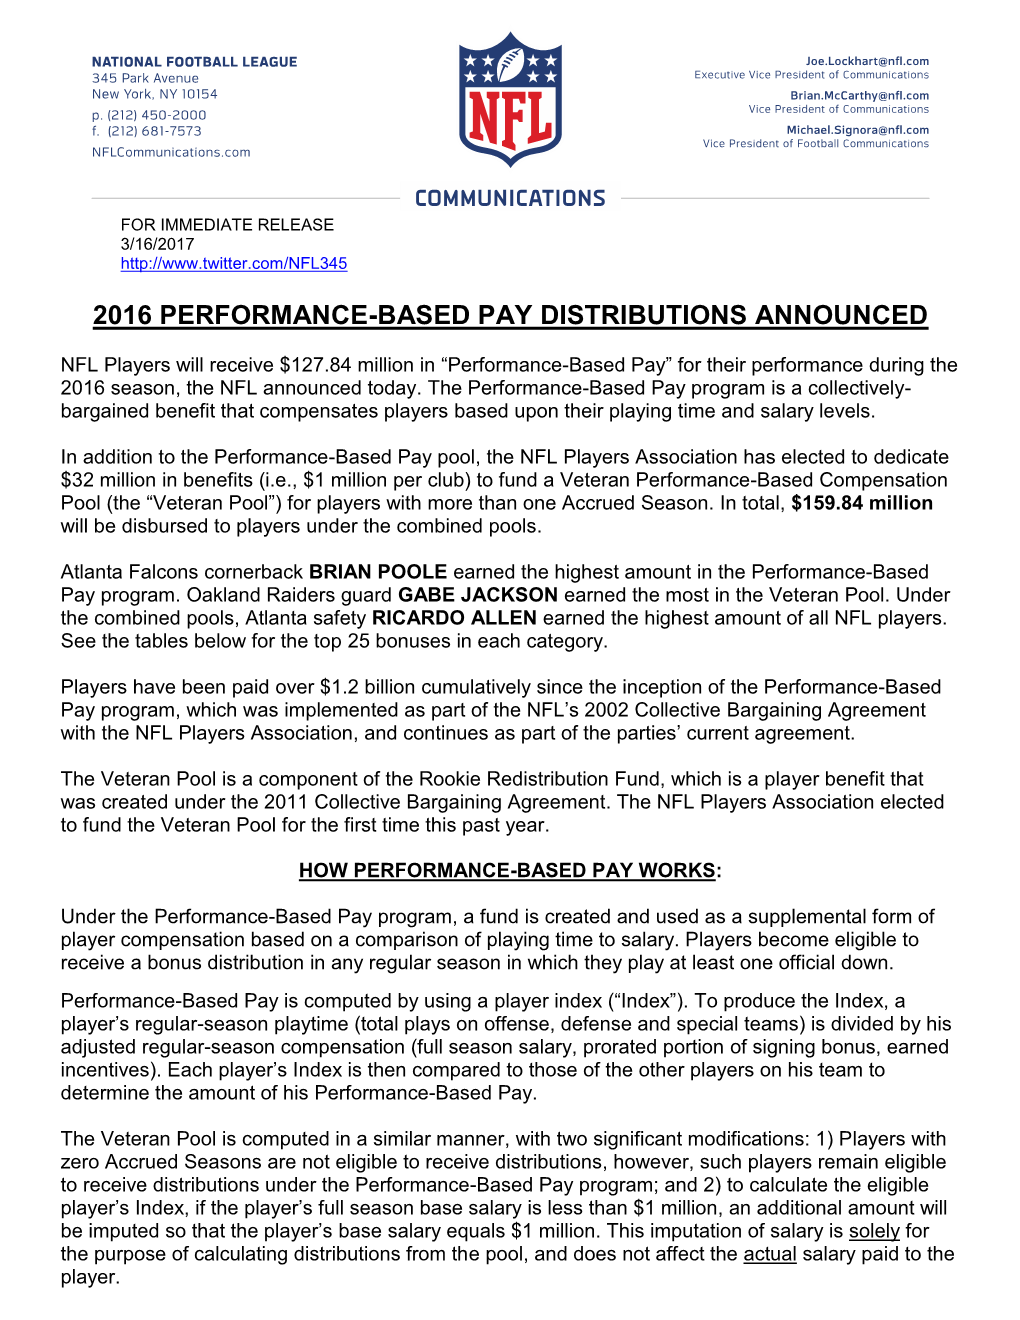 2016 Performance-Based Pay Distributions Announced